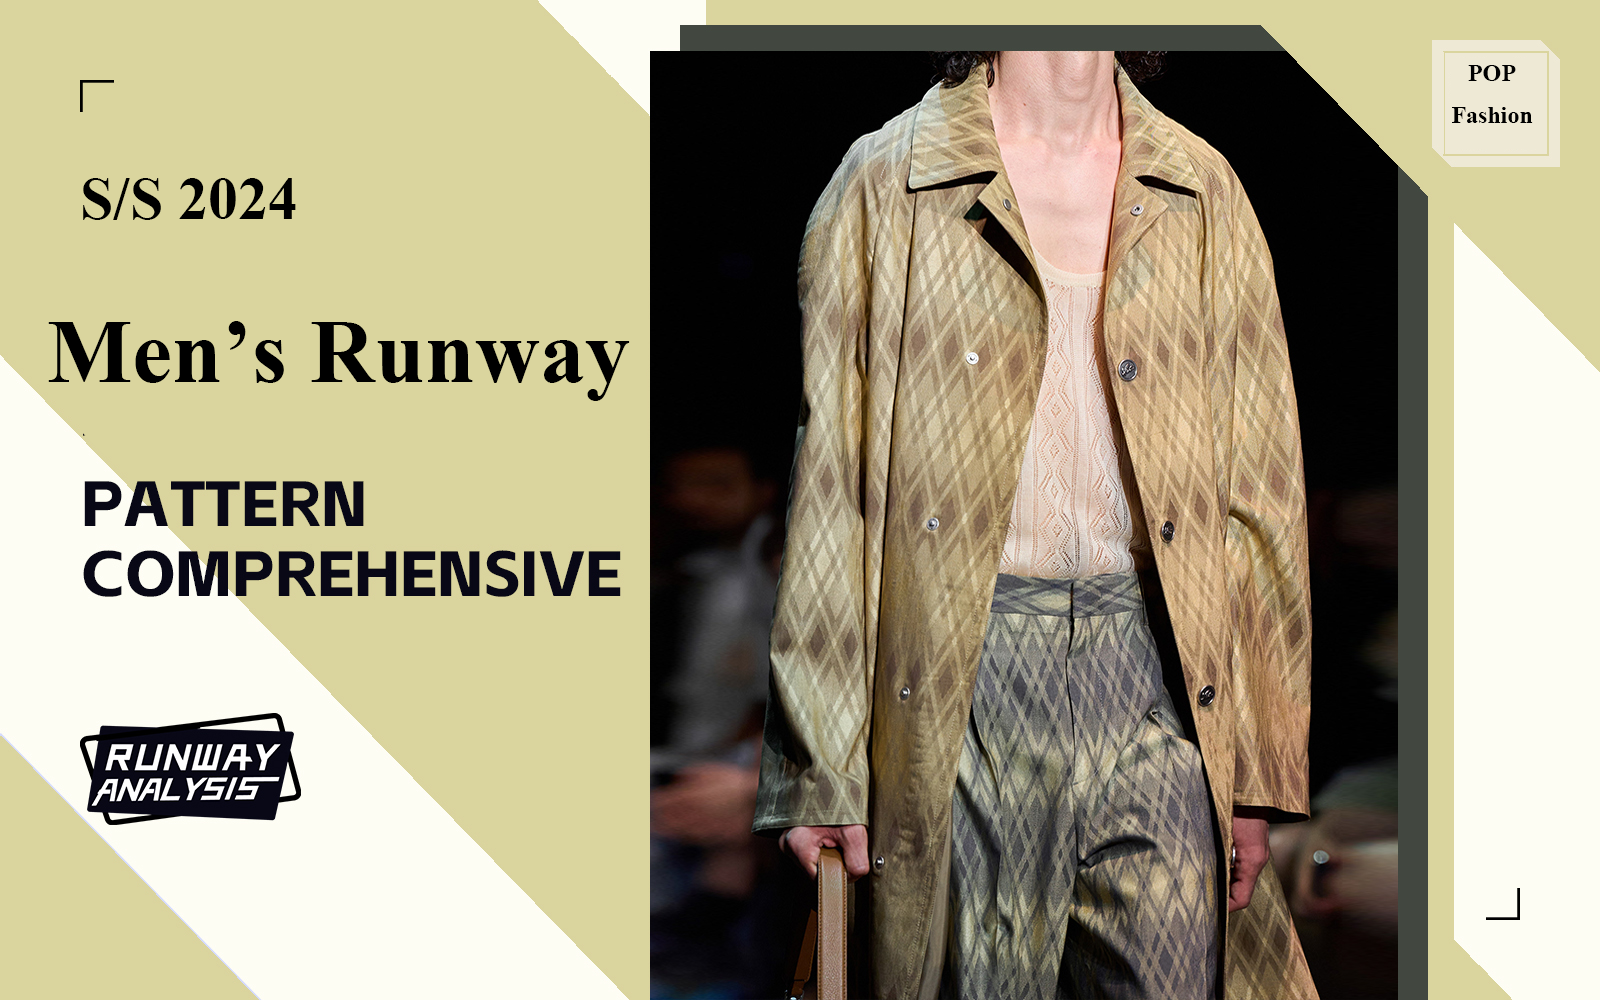 Leisure Holiday -- The Comprehensive Analysis of Men's Runway (Part 4)